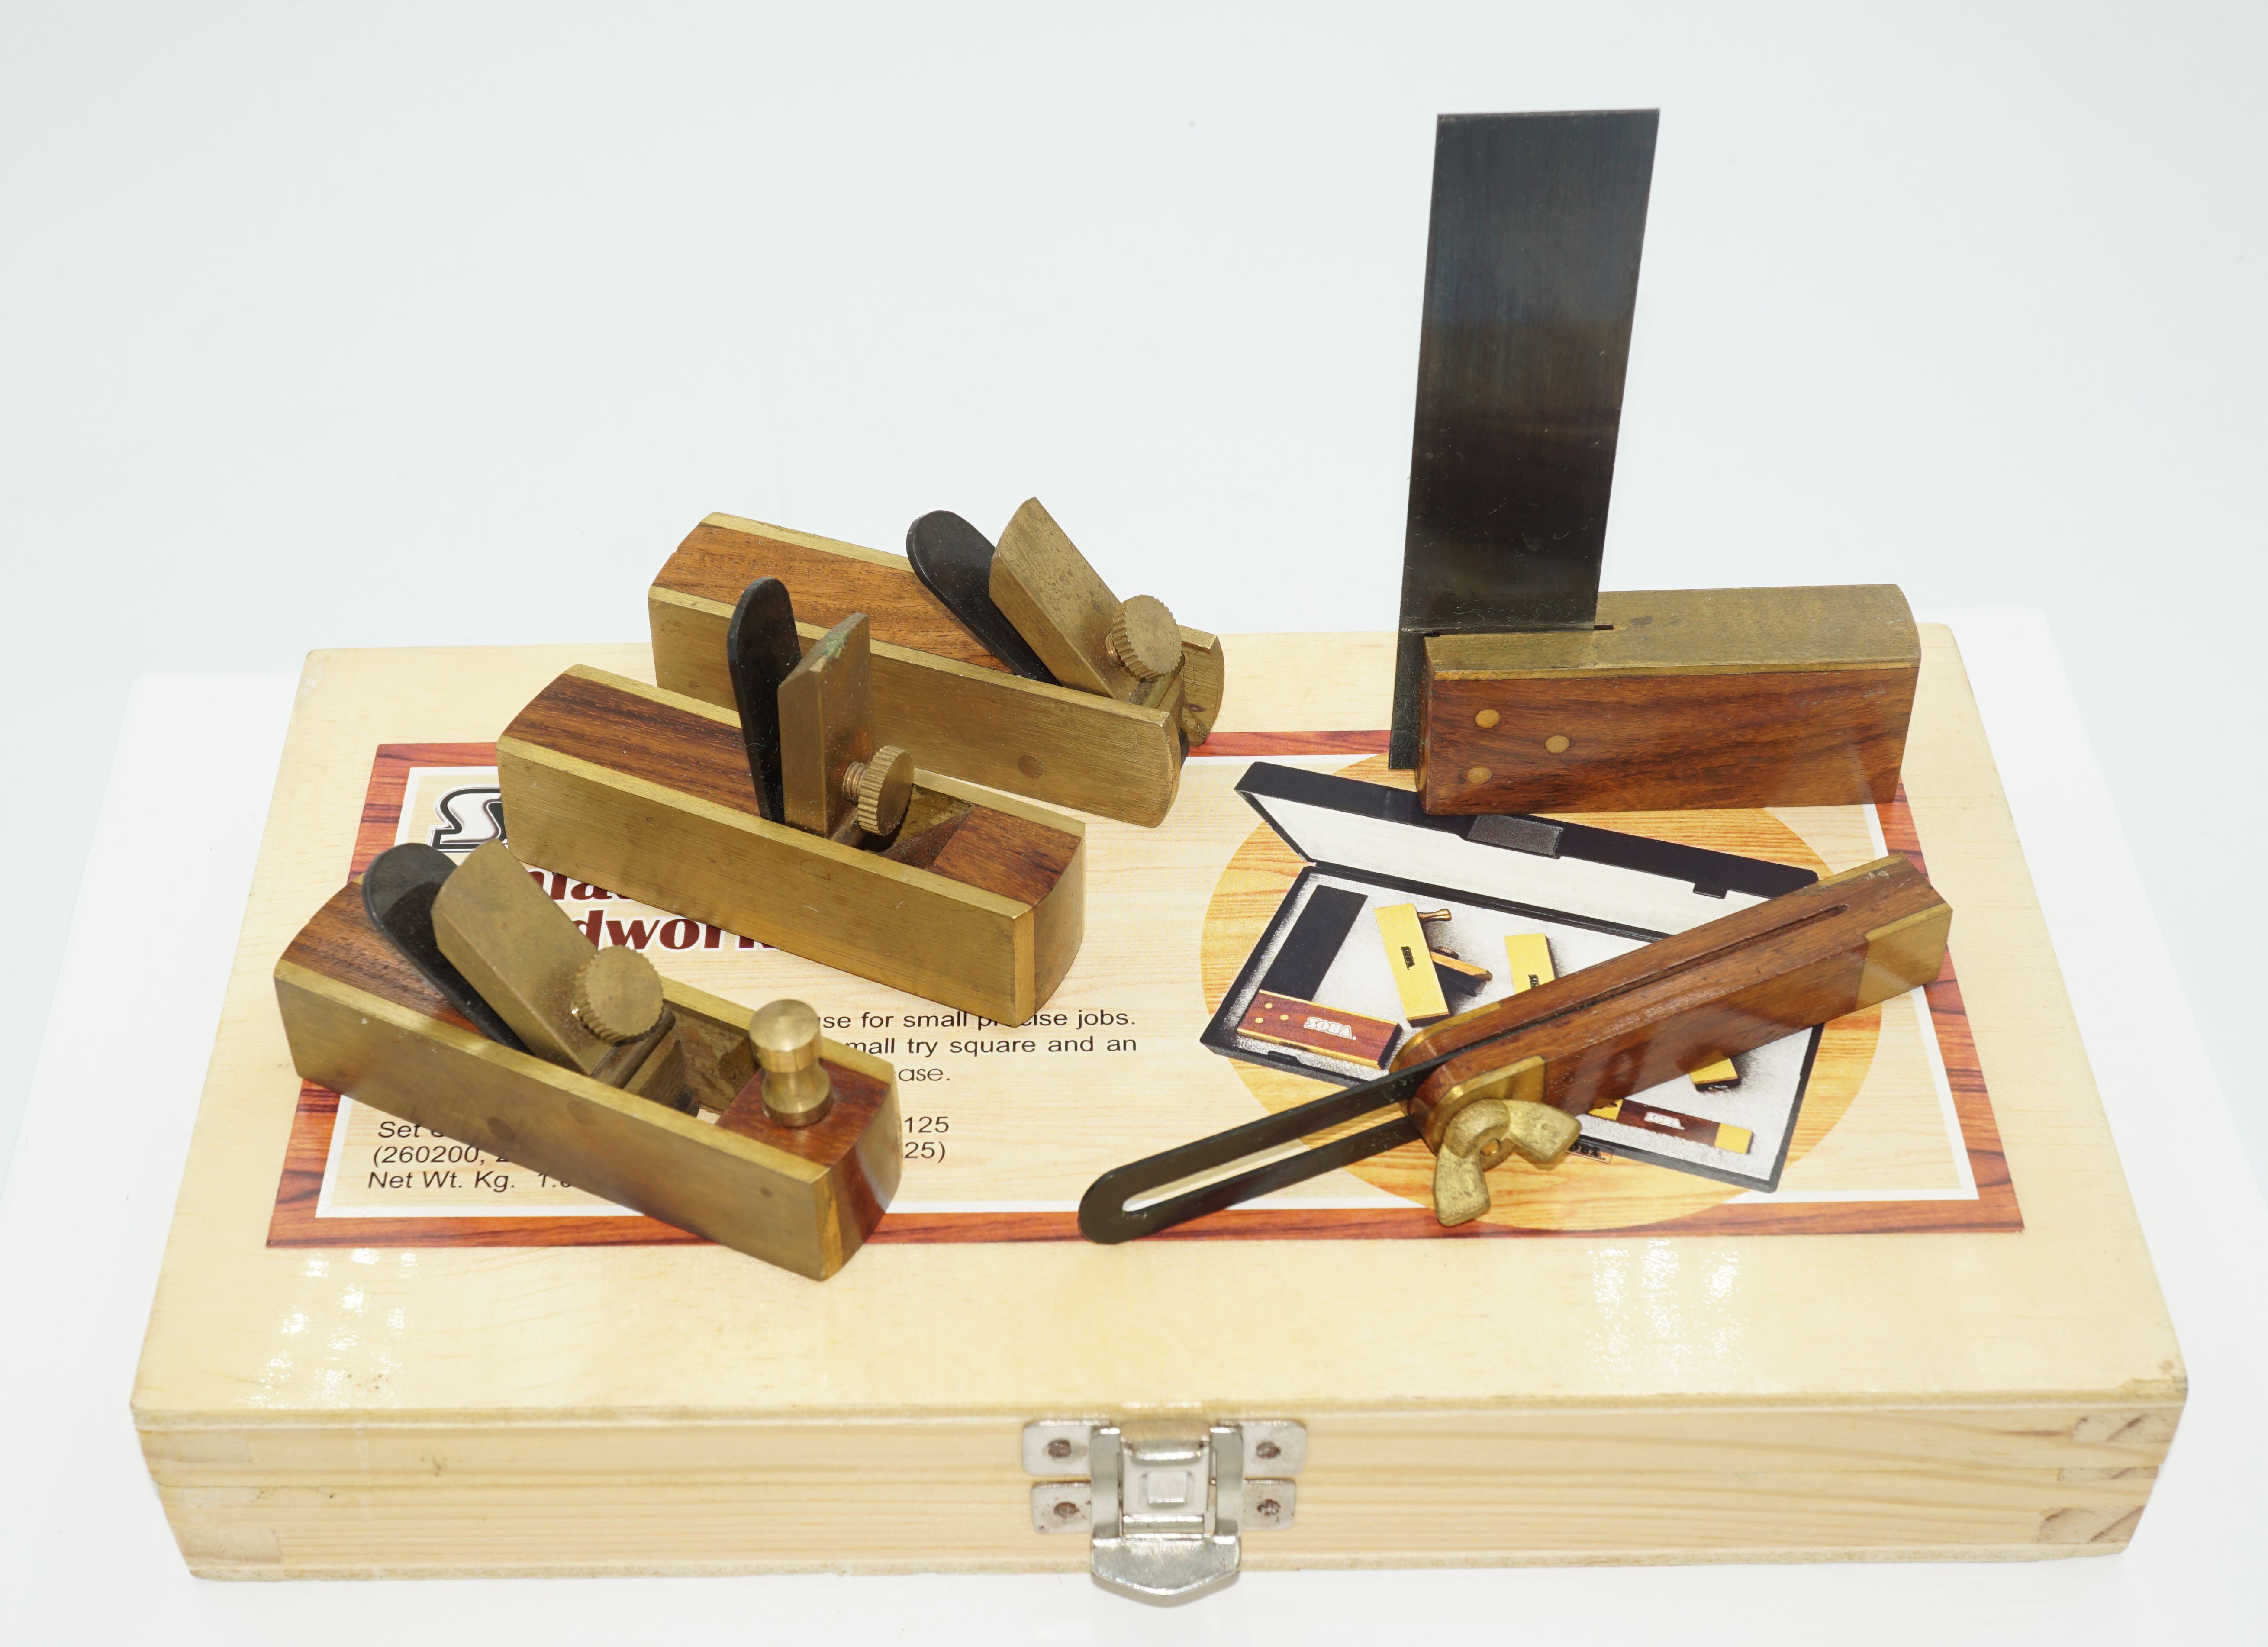 Soba Miniature Woodworking Kit SORRY OUT OF STOCK - Buy woodworking tools